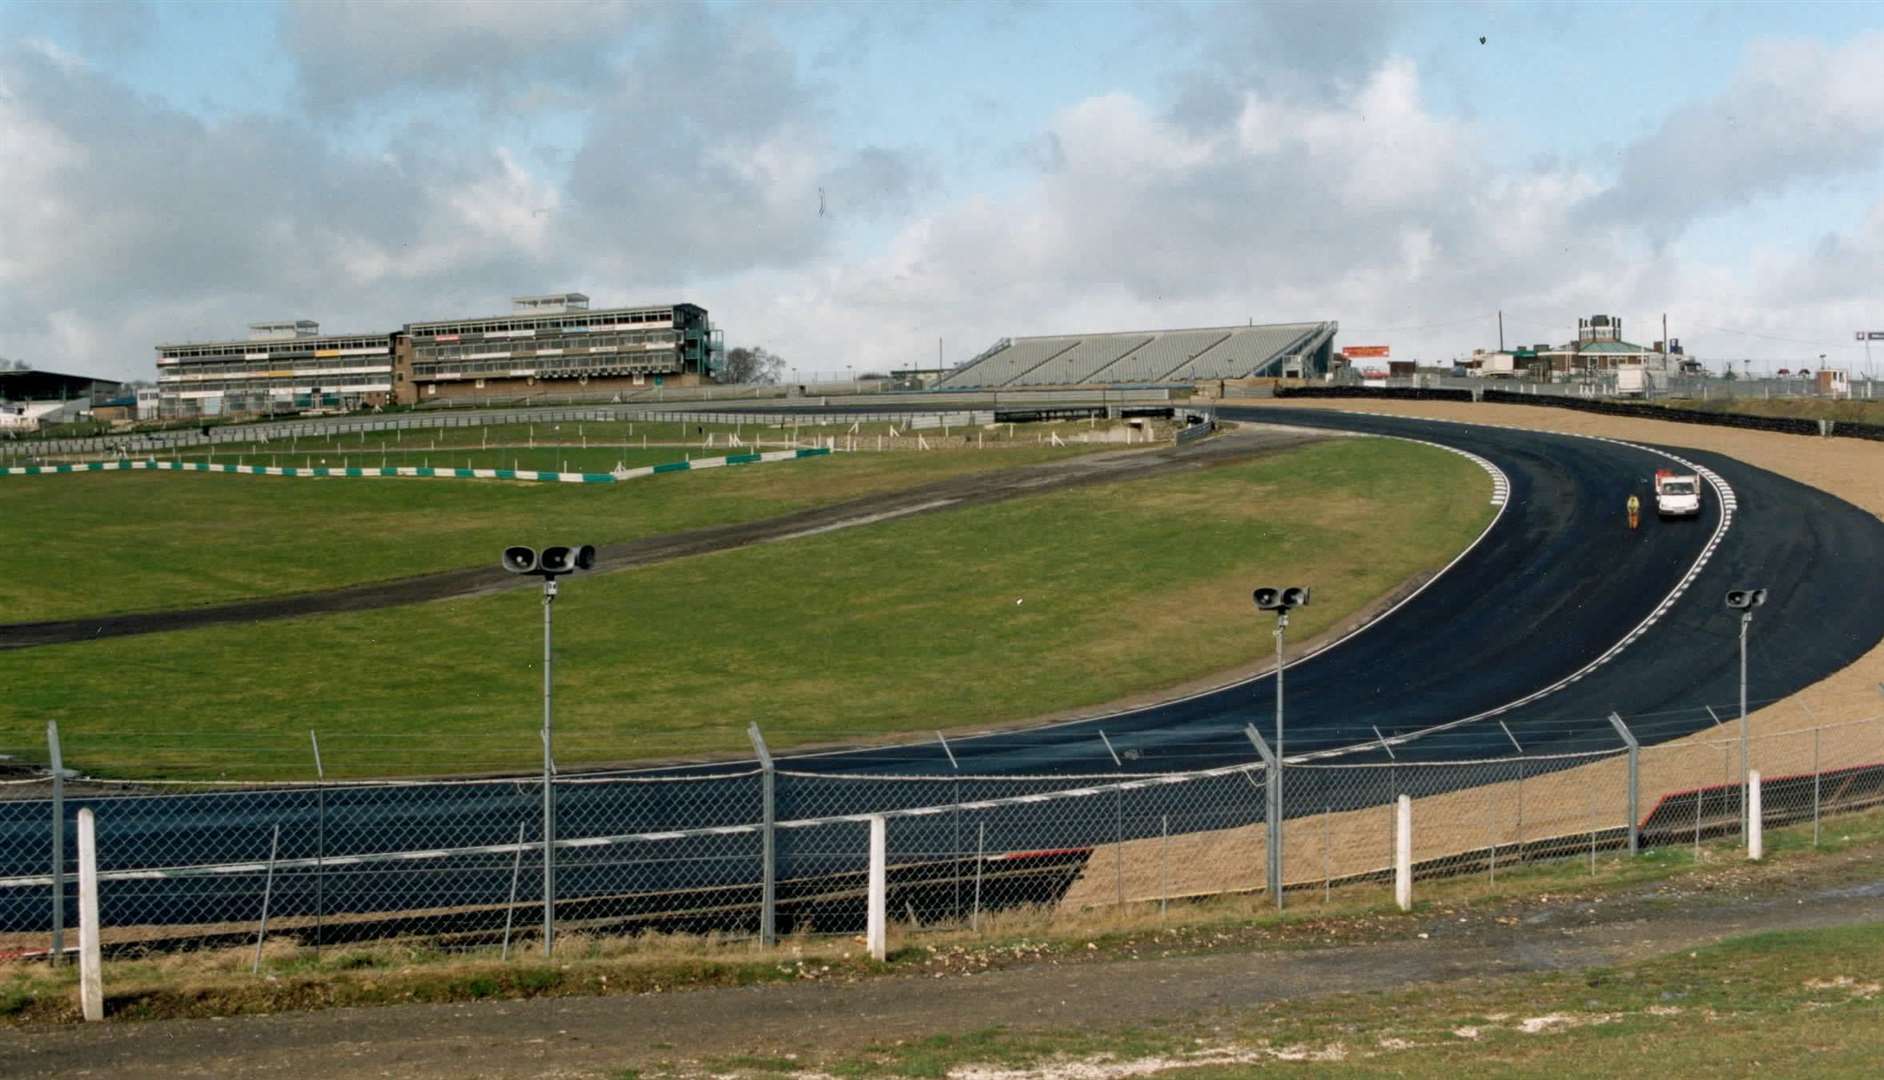 One of the world's best spectator spots - Paddock Hill Bend at Brands Hatch in February 1997